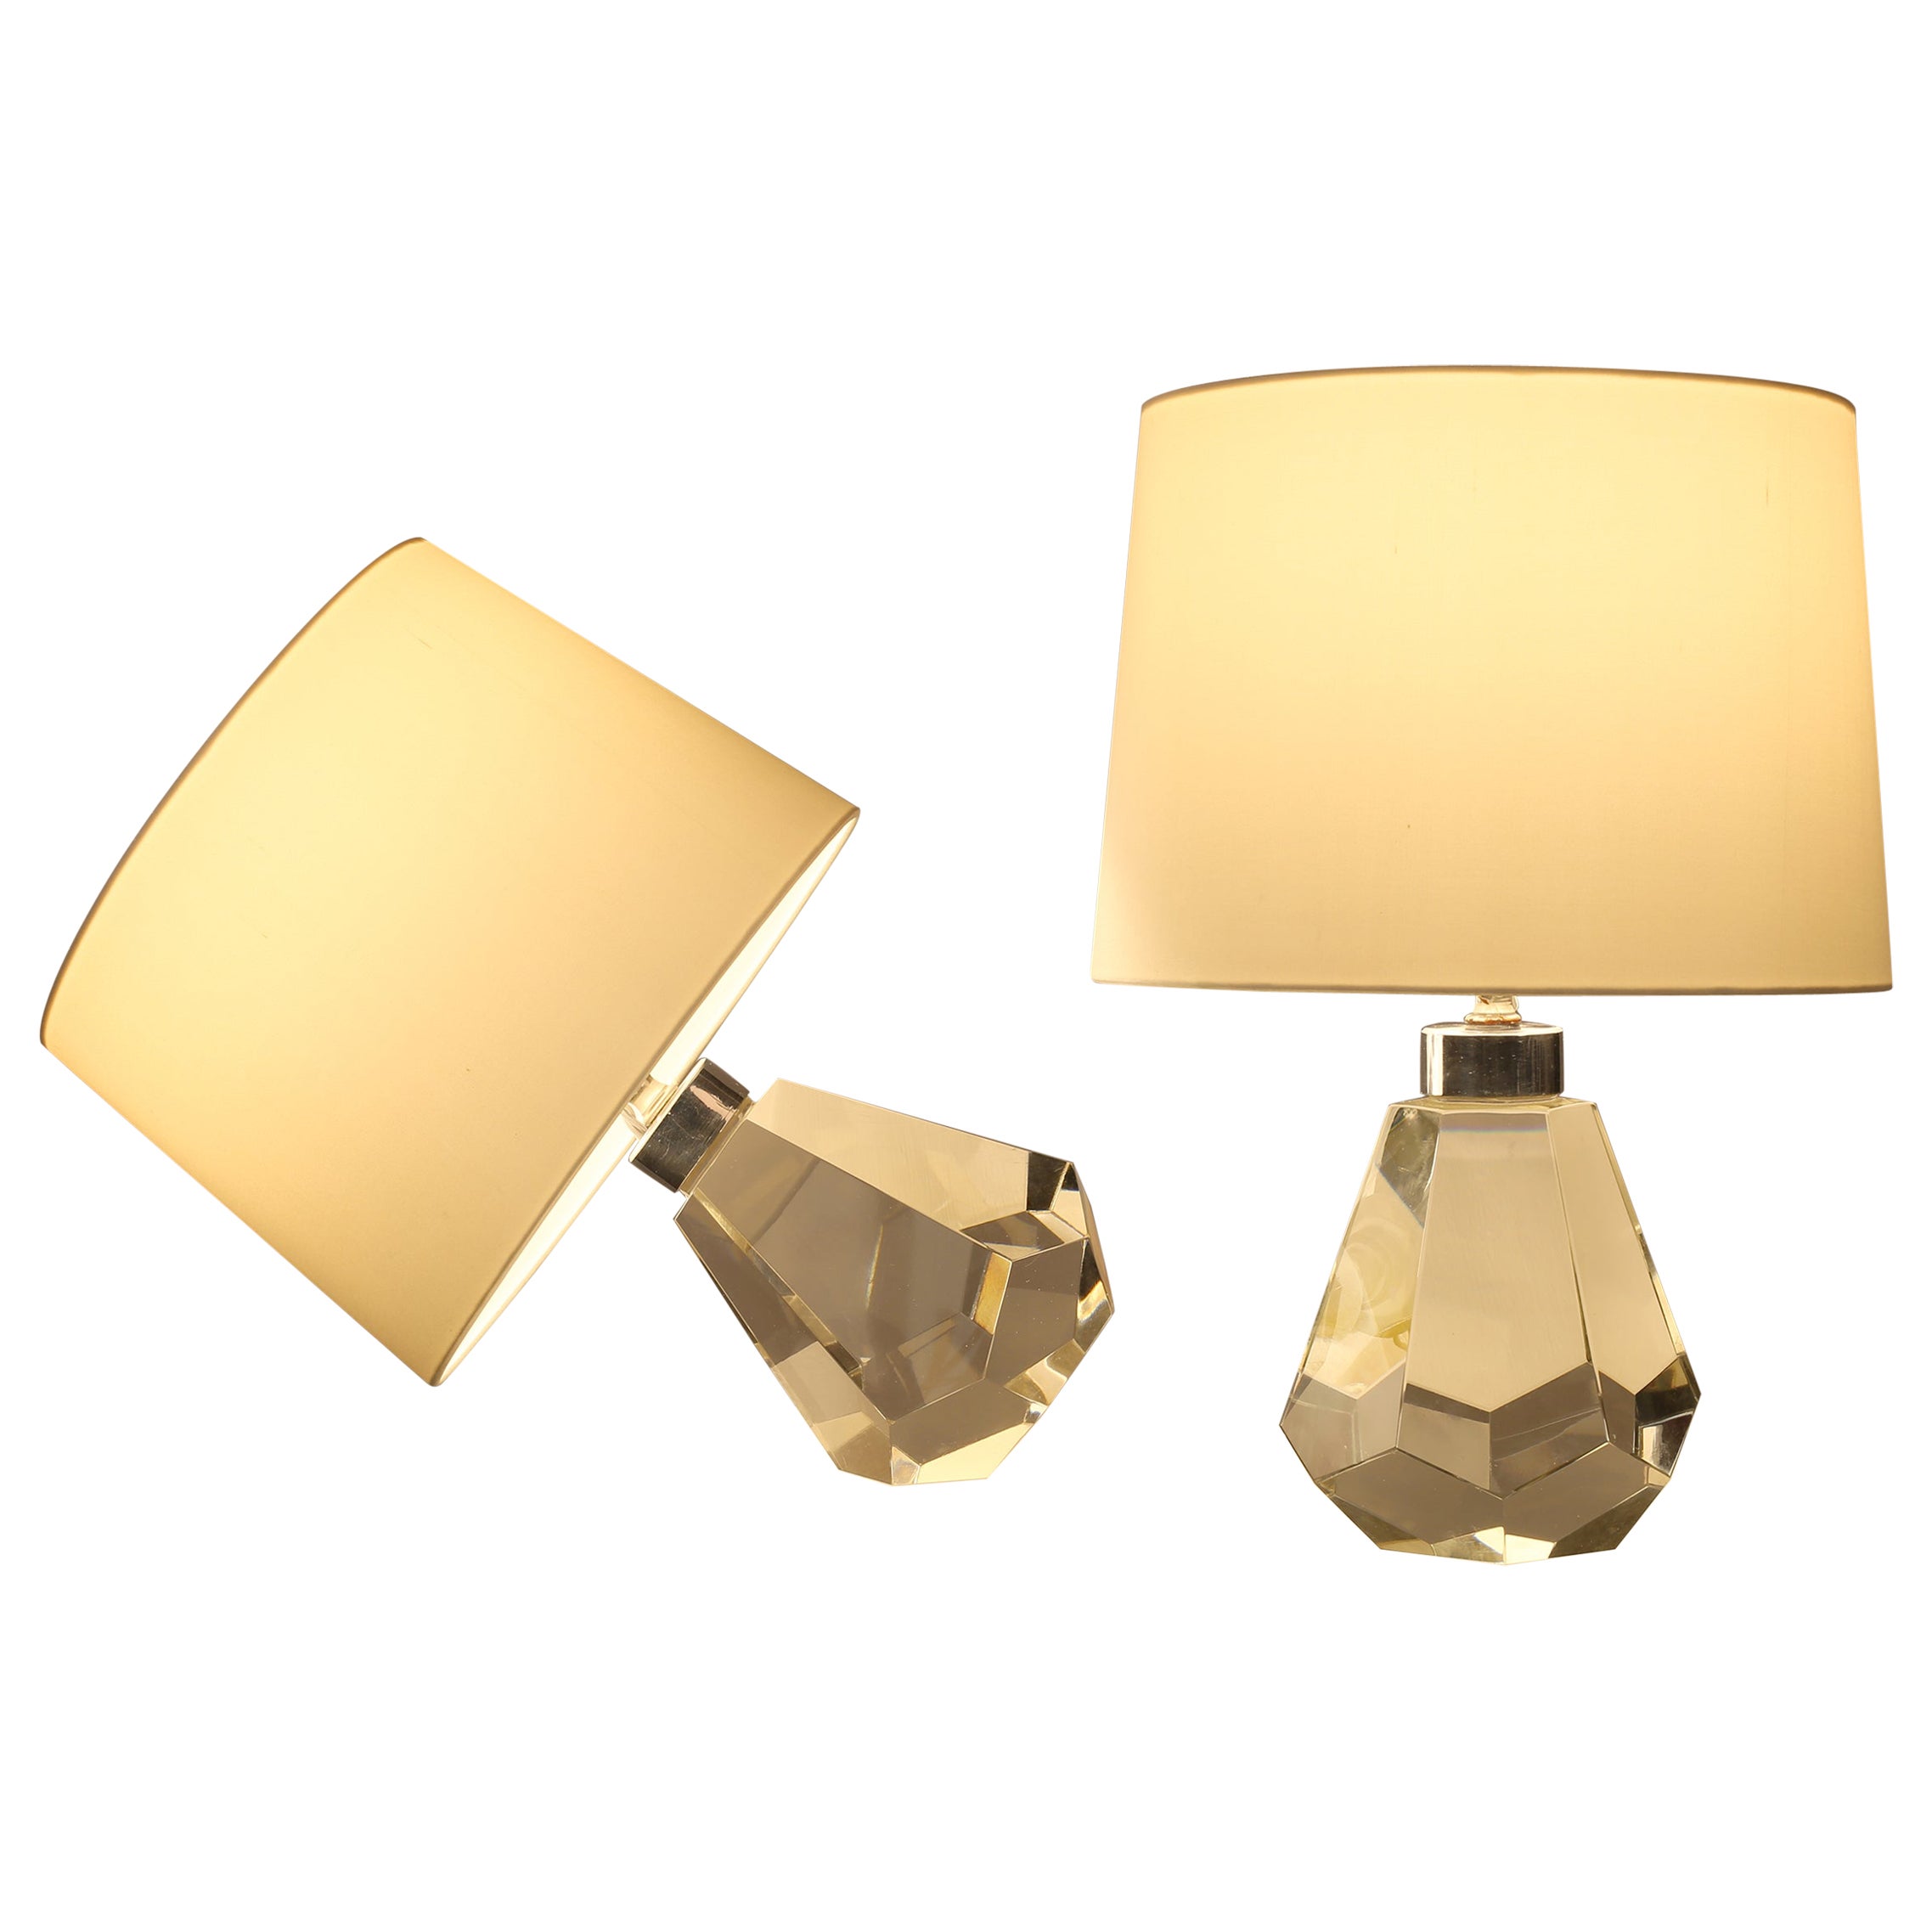 Pair of French 1930s Art Deco Faceted Crystal Glass Jewel Table Lamps For Sale